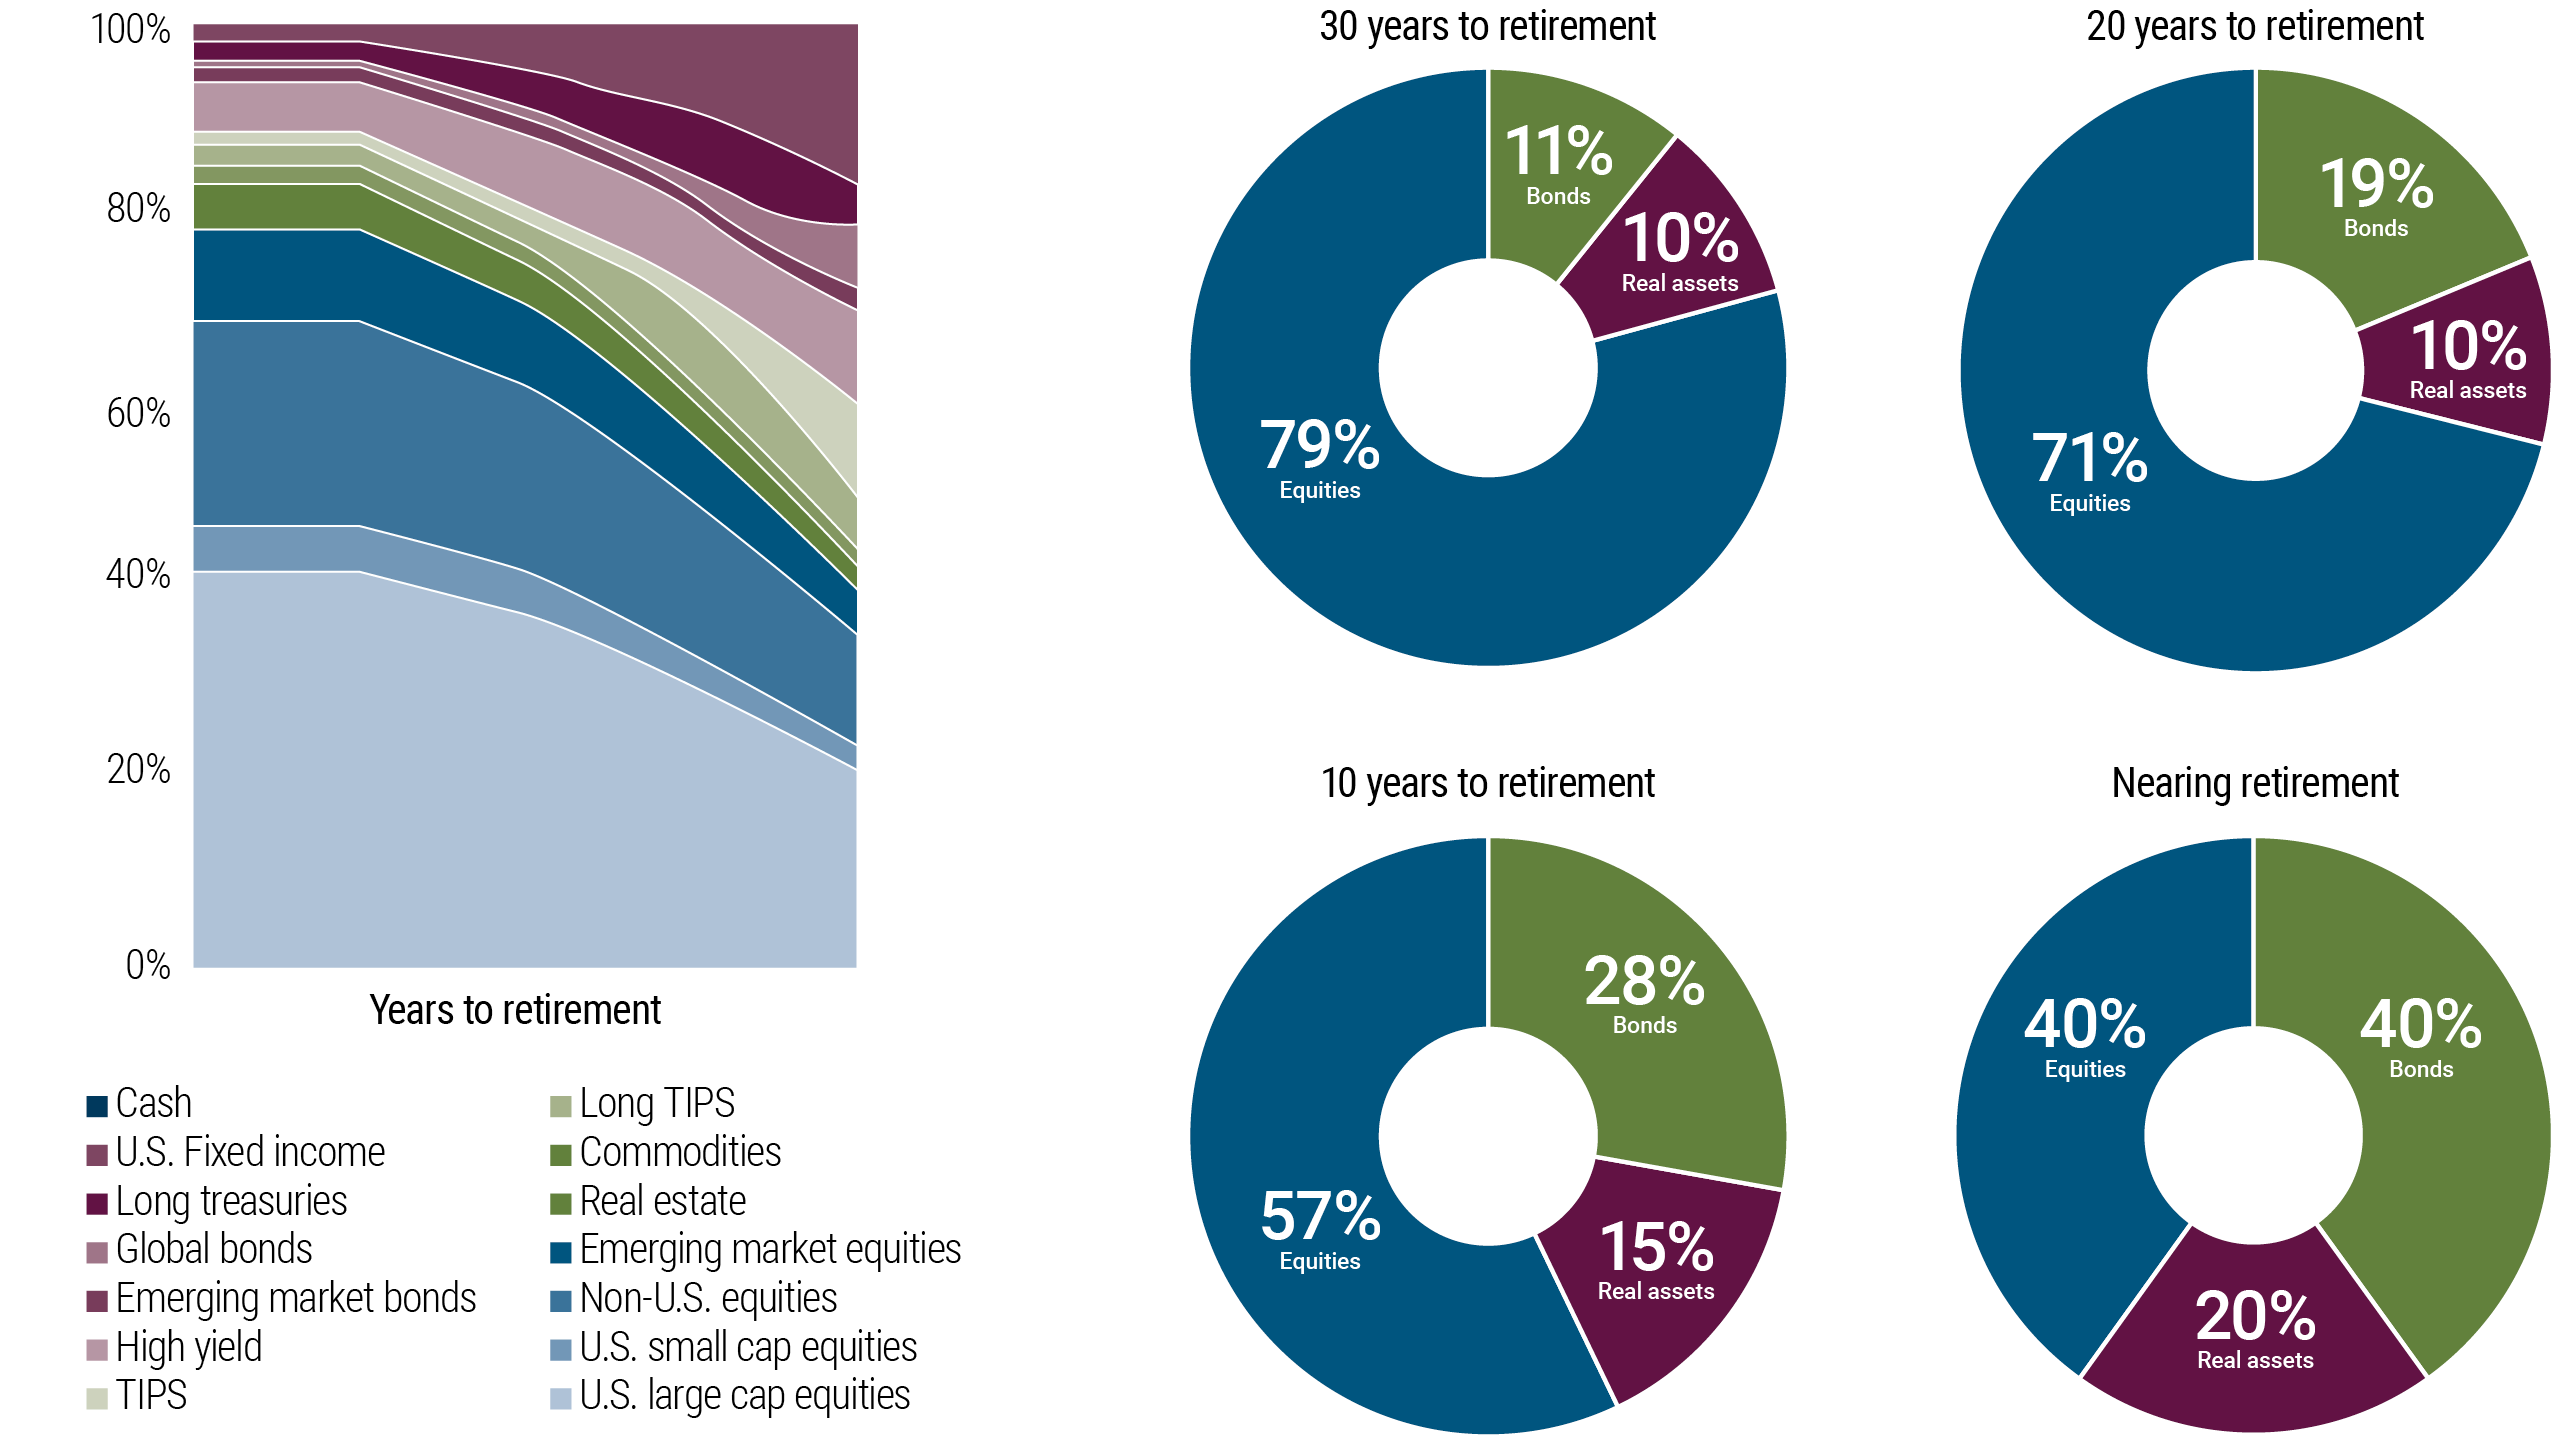 The figure shows a shaded line graph and four pie charts, illustrating how an investor’s asset allocation might progress over different life stages leading to retirement. On the left, the line graph shows the changing composition of different assets over time up until retirement, with percentage allocation on the vertical axis and years to retirement on the horizontal axis. The line graph shows change allocations over time, with the share in equities falling and bonds rising. The graph corresponds to the four pie charts on the right, marking 30 years, 20 years, 10 years and nearing retirement. The pie charts show how at 30 years out, equities comprise 79% of the allocation, but the share drops to 40% near retirement. Conversely, bonds represent an 11% share when retirement is 30 years away, but that grows to 40% near retirement. Real assets represent 10% of the allocation 30 years out, growing to 20% near retirement. In essence, the allocation of the investor with 30 years to retirement has a greater concentration to equities, which shifts to a more conservative, lower risk approach as the investor approaches retirement.